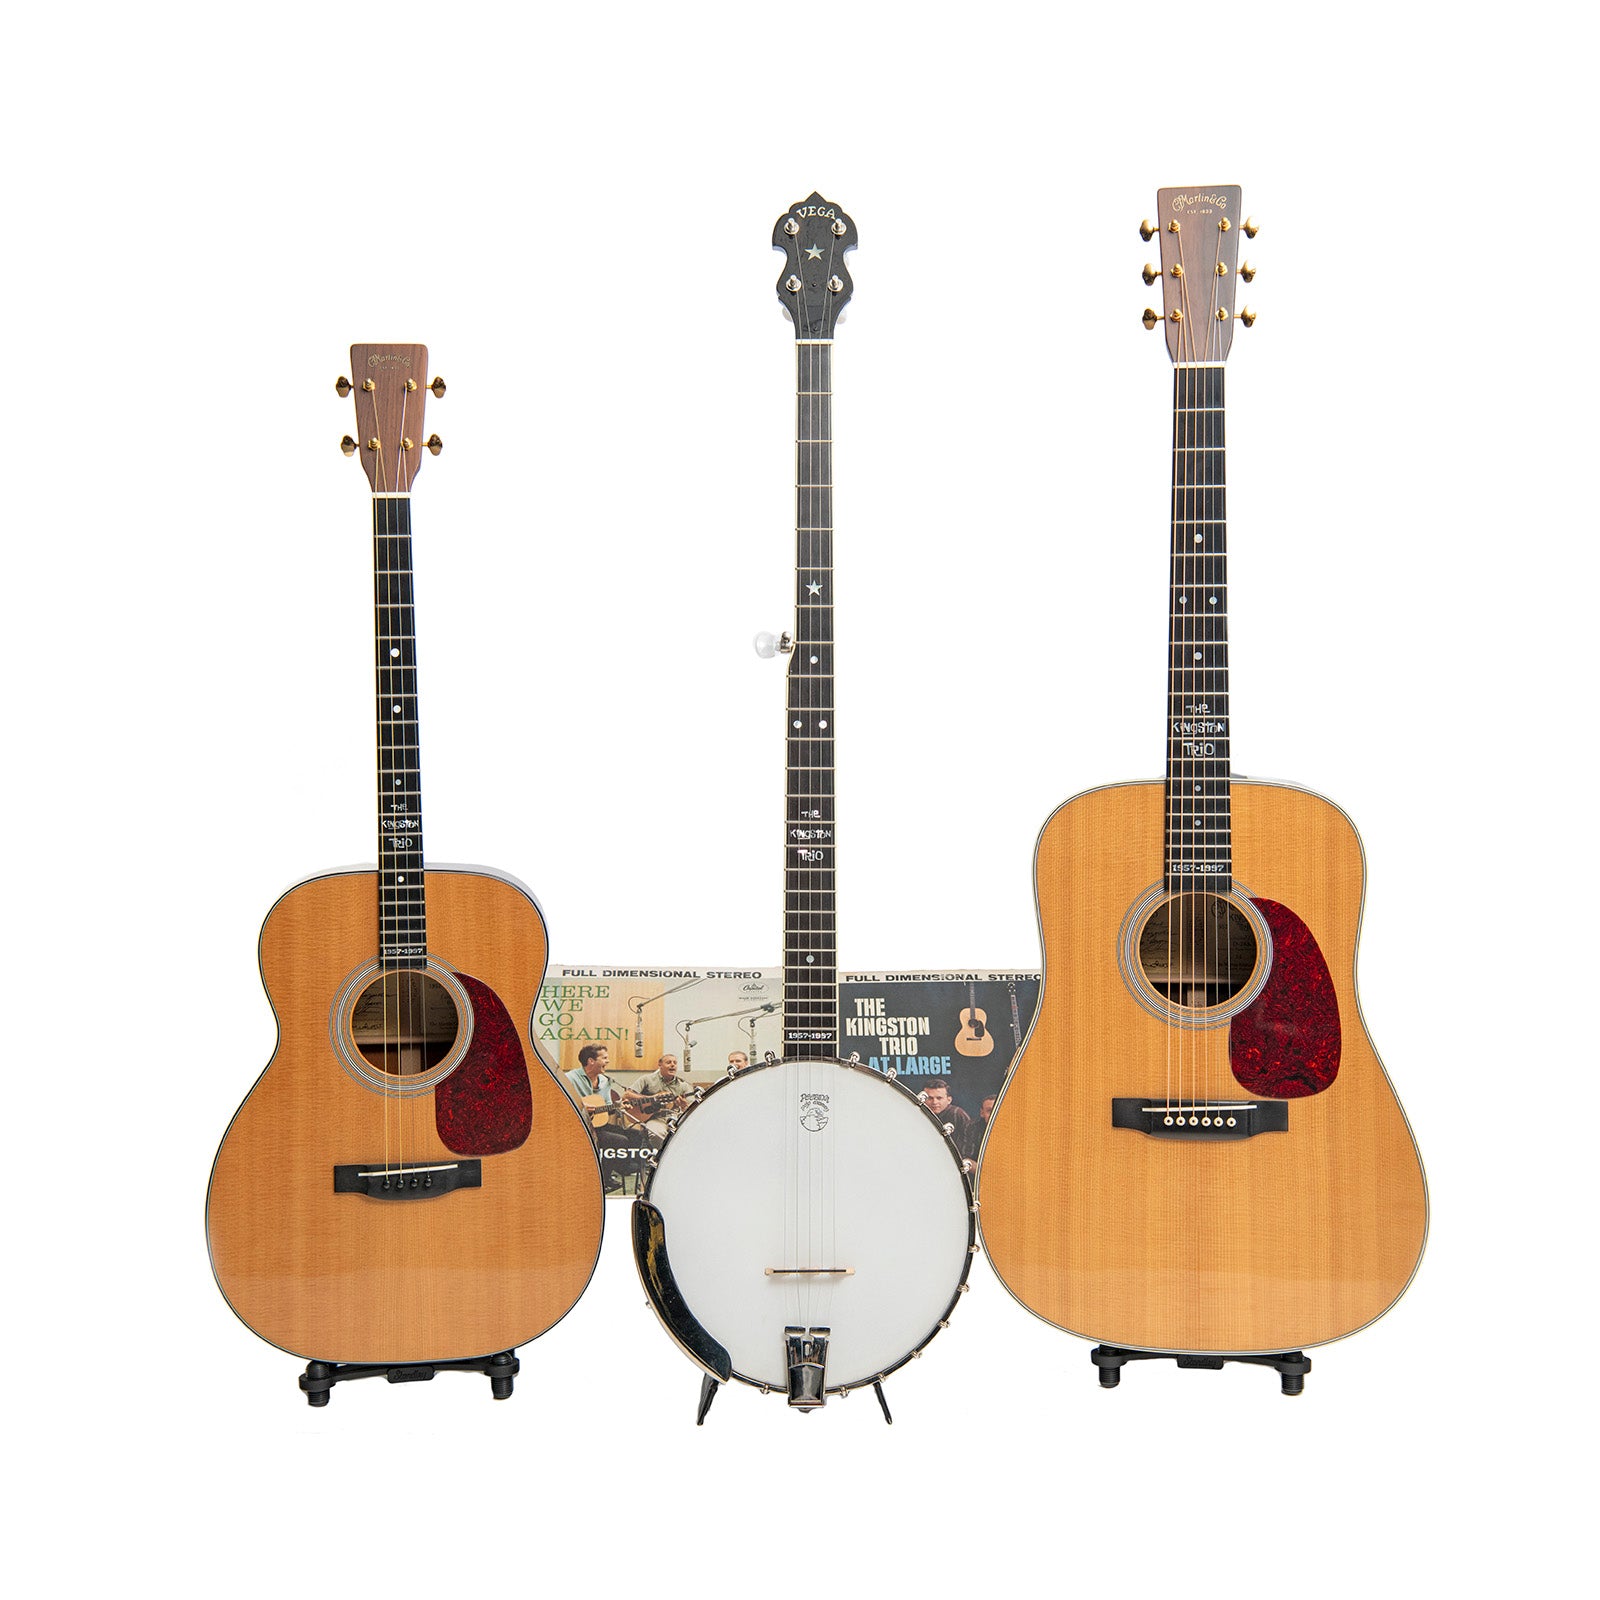 Group of  Guitars and banjo of The Kingston Trio Set (1997)